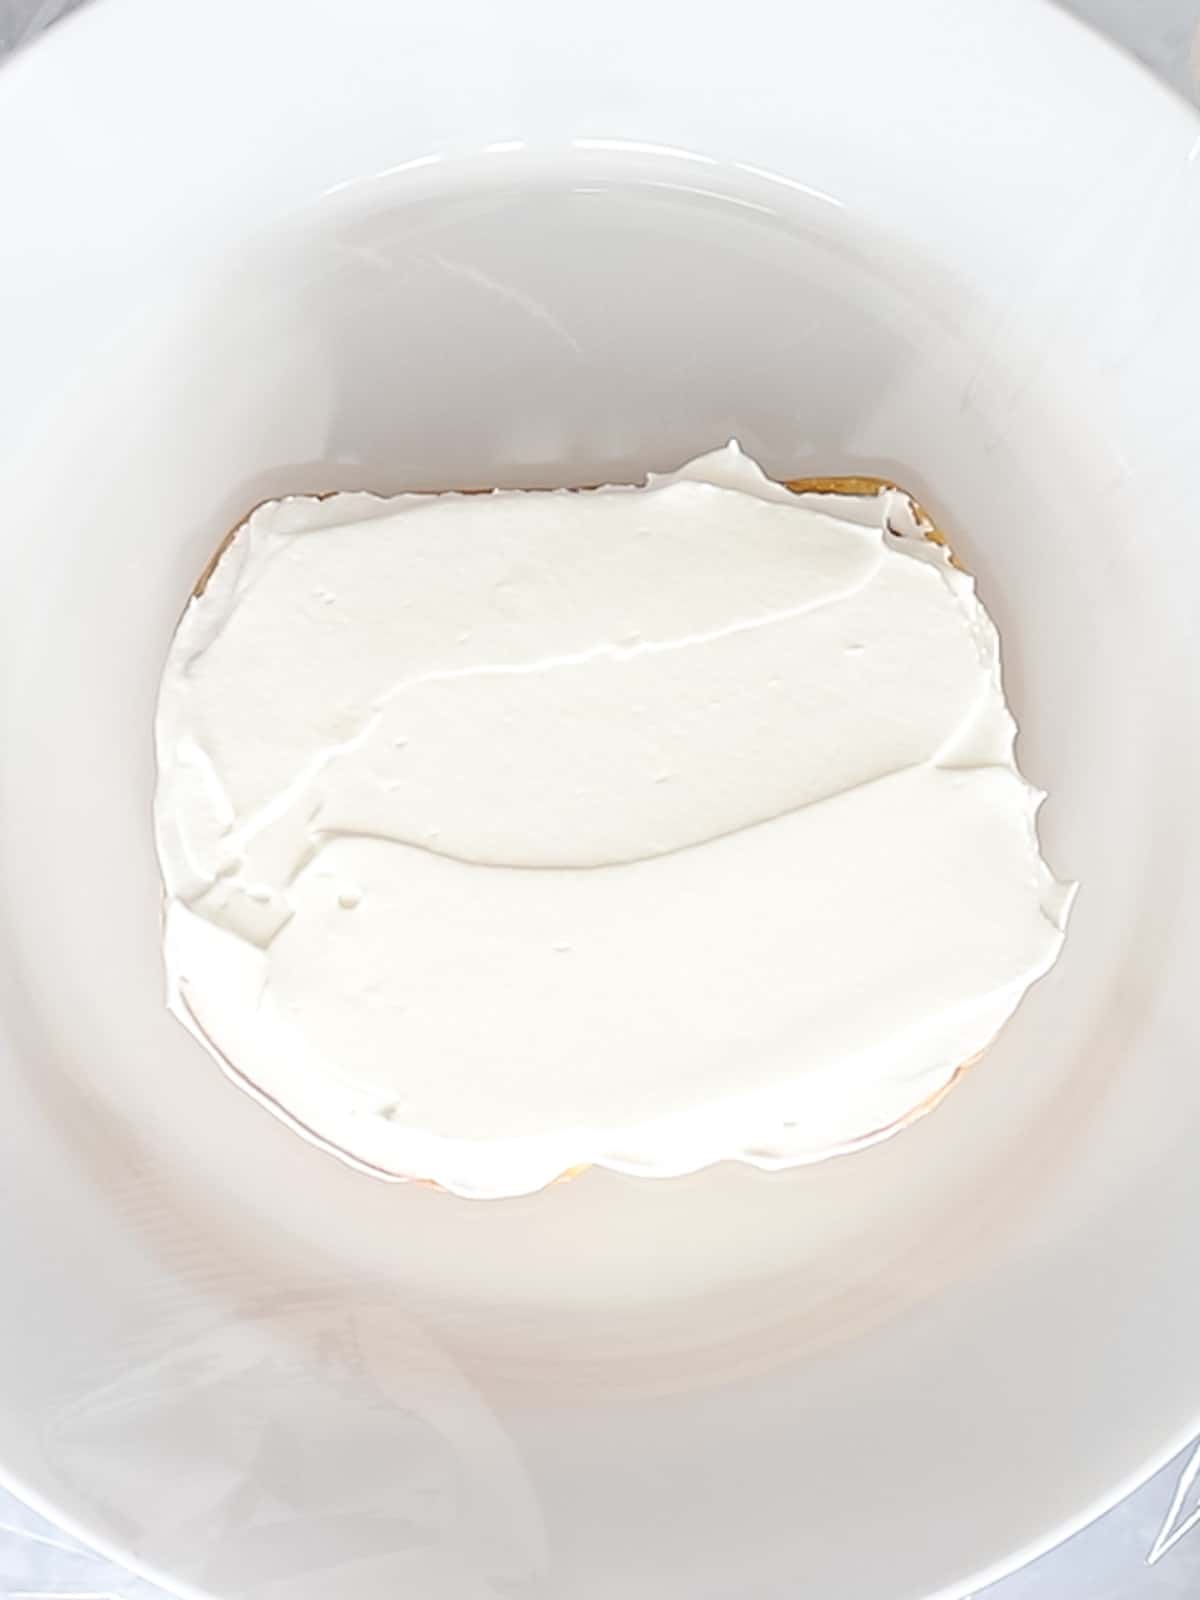 Fluffy whipped cream applied to a slice of white milk bread.